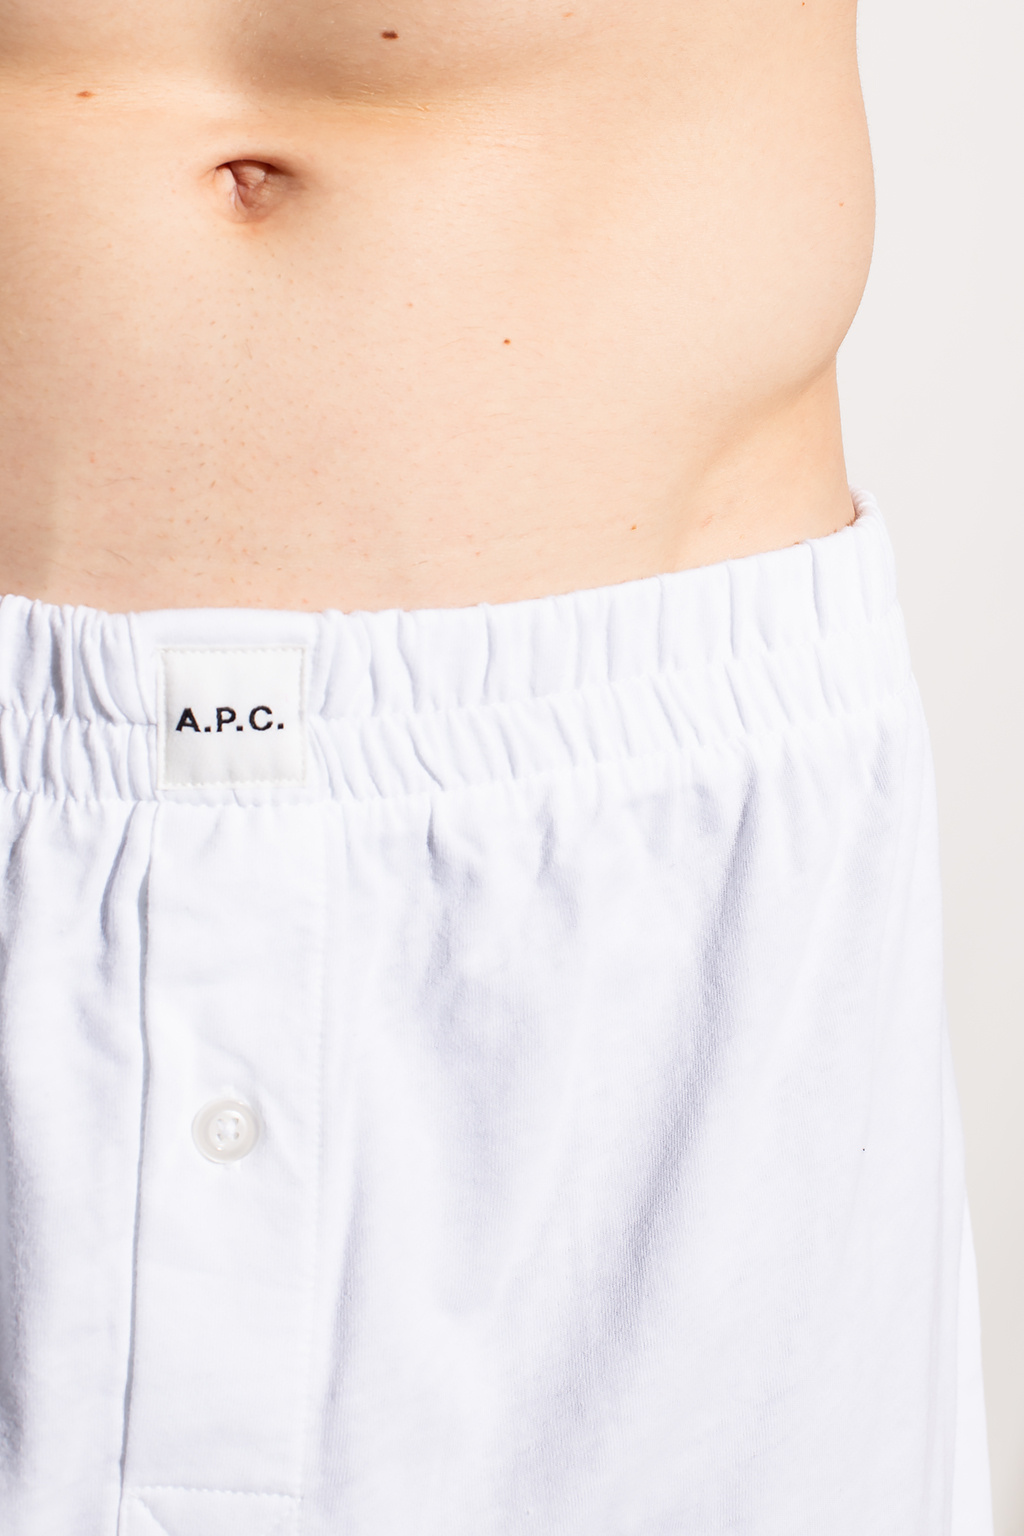 A.P.C. A history of the brand